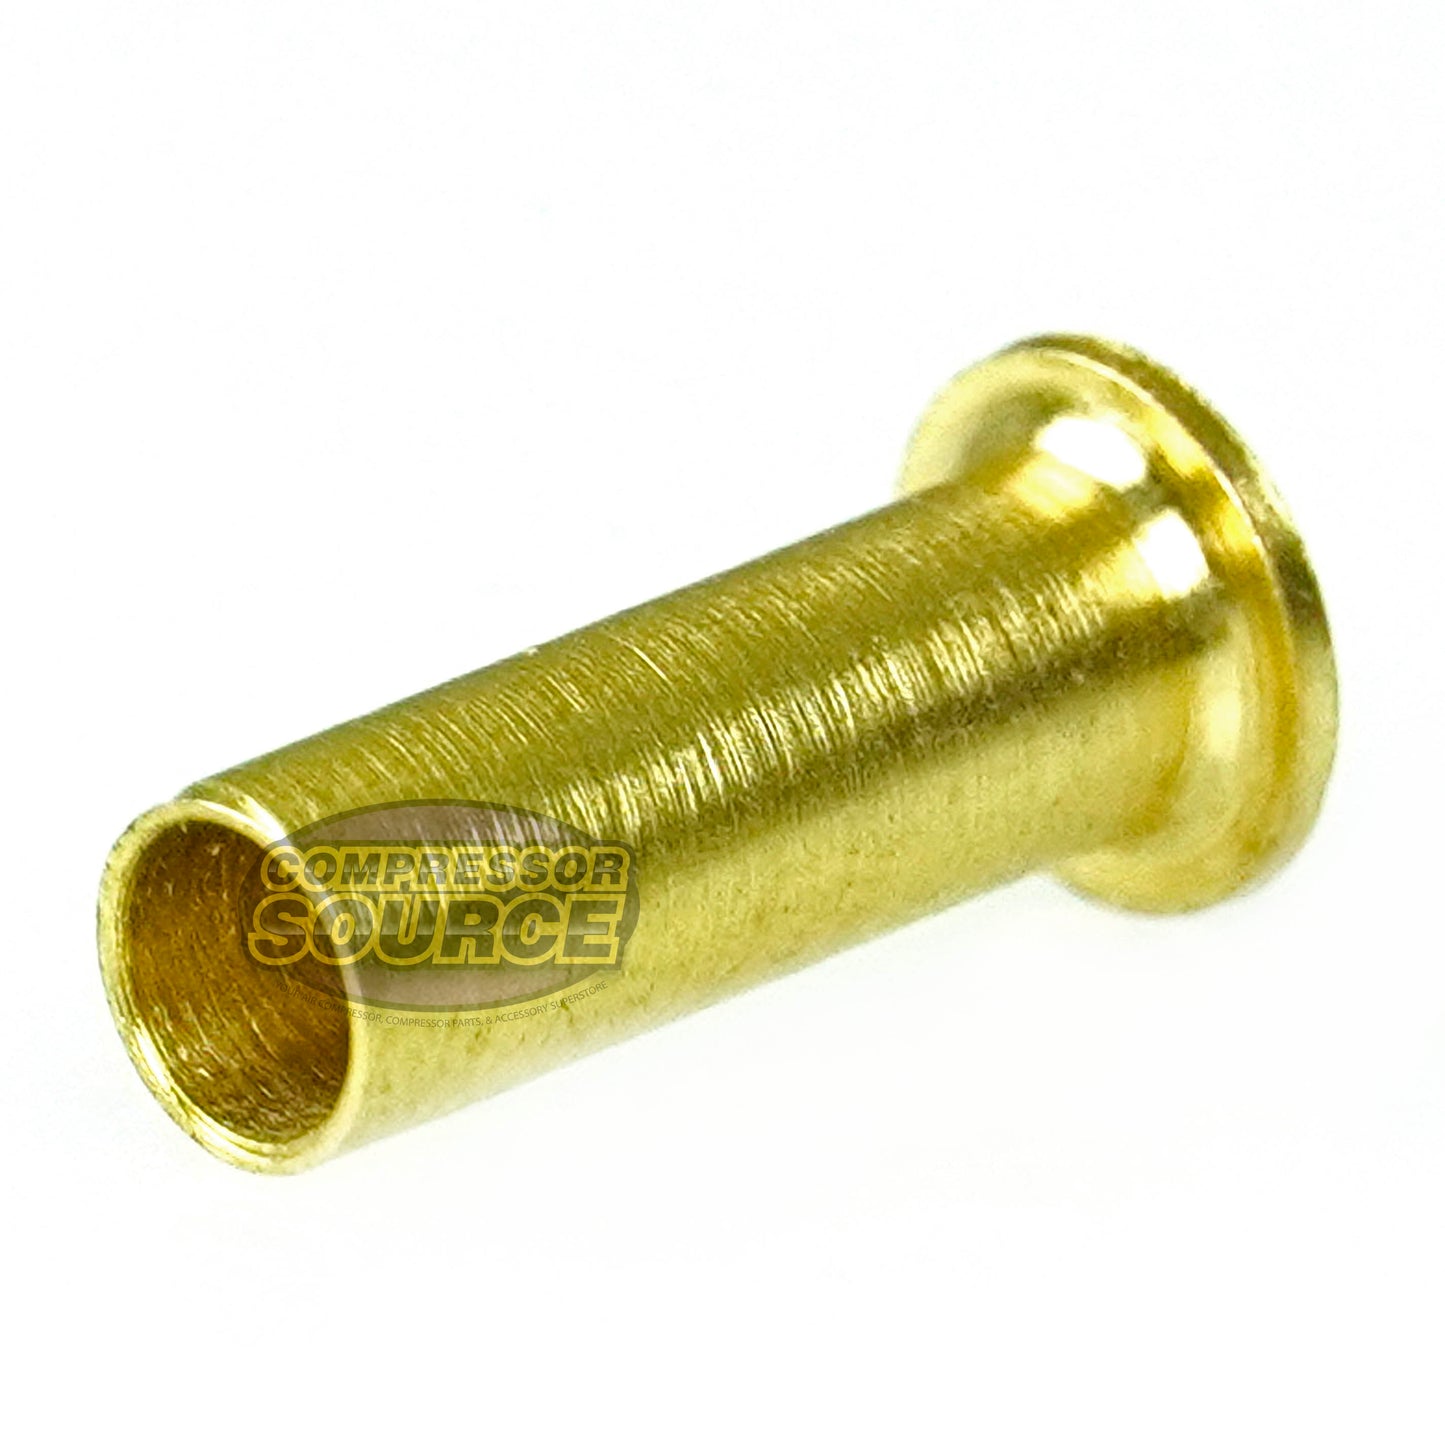 1/4" Brass Compression Insert Fitting for Air Water Fuel Oil Applications 2-Pack